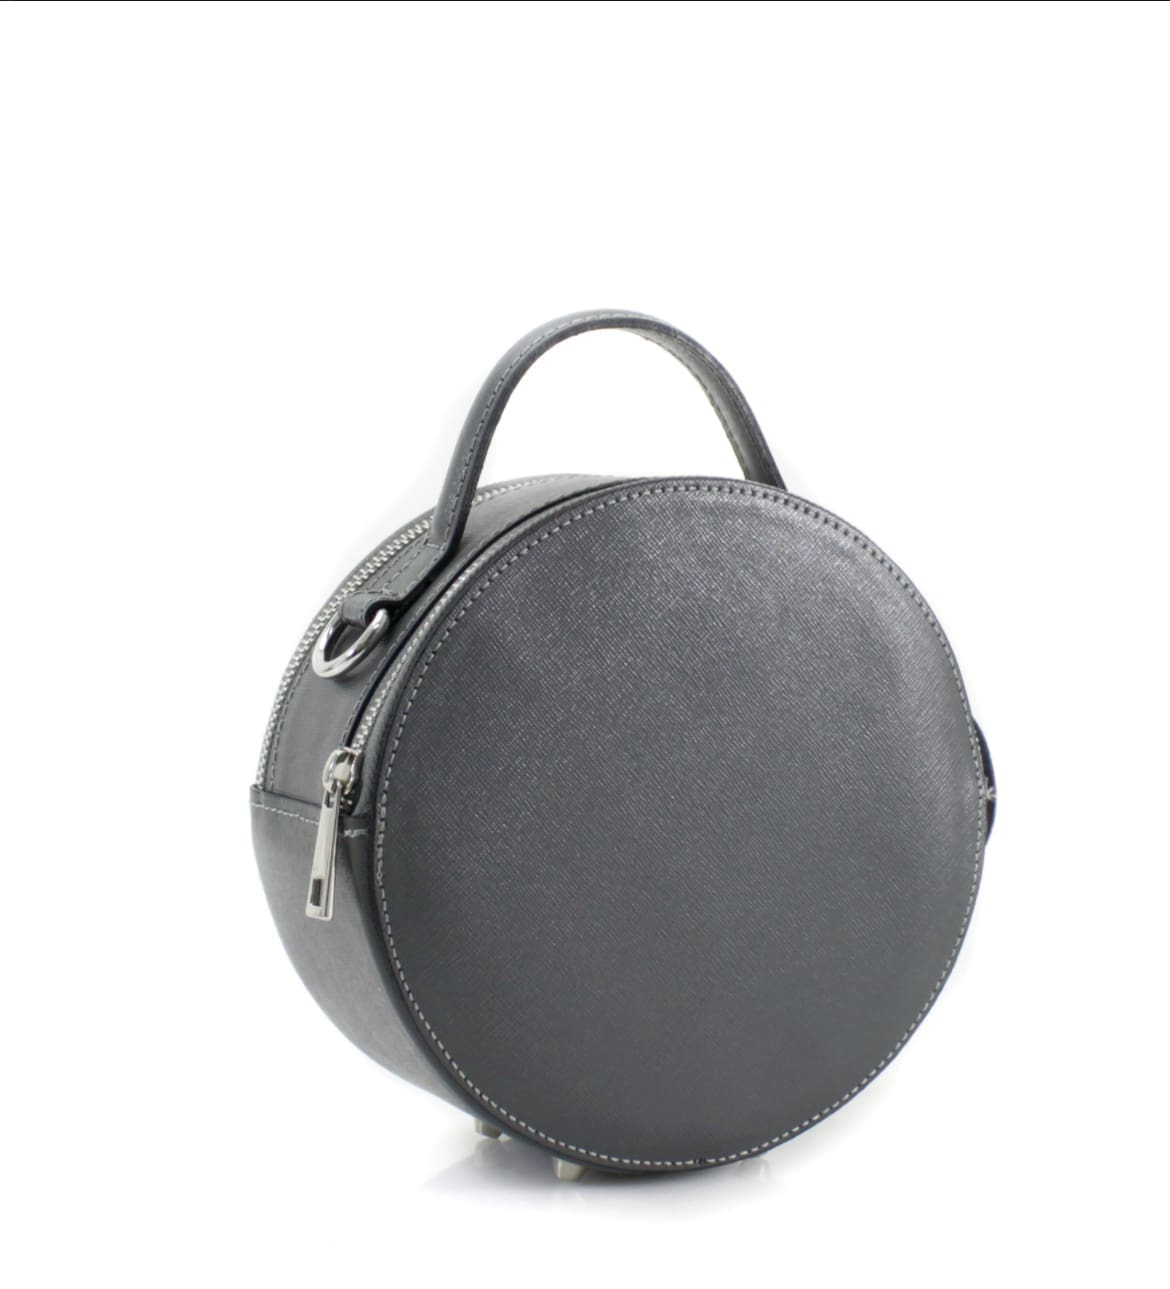 A round black leather bag on a white background.